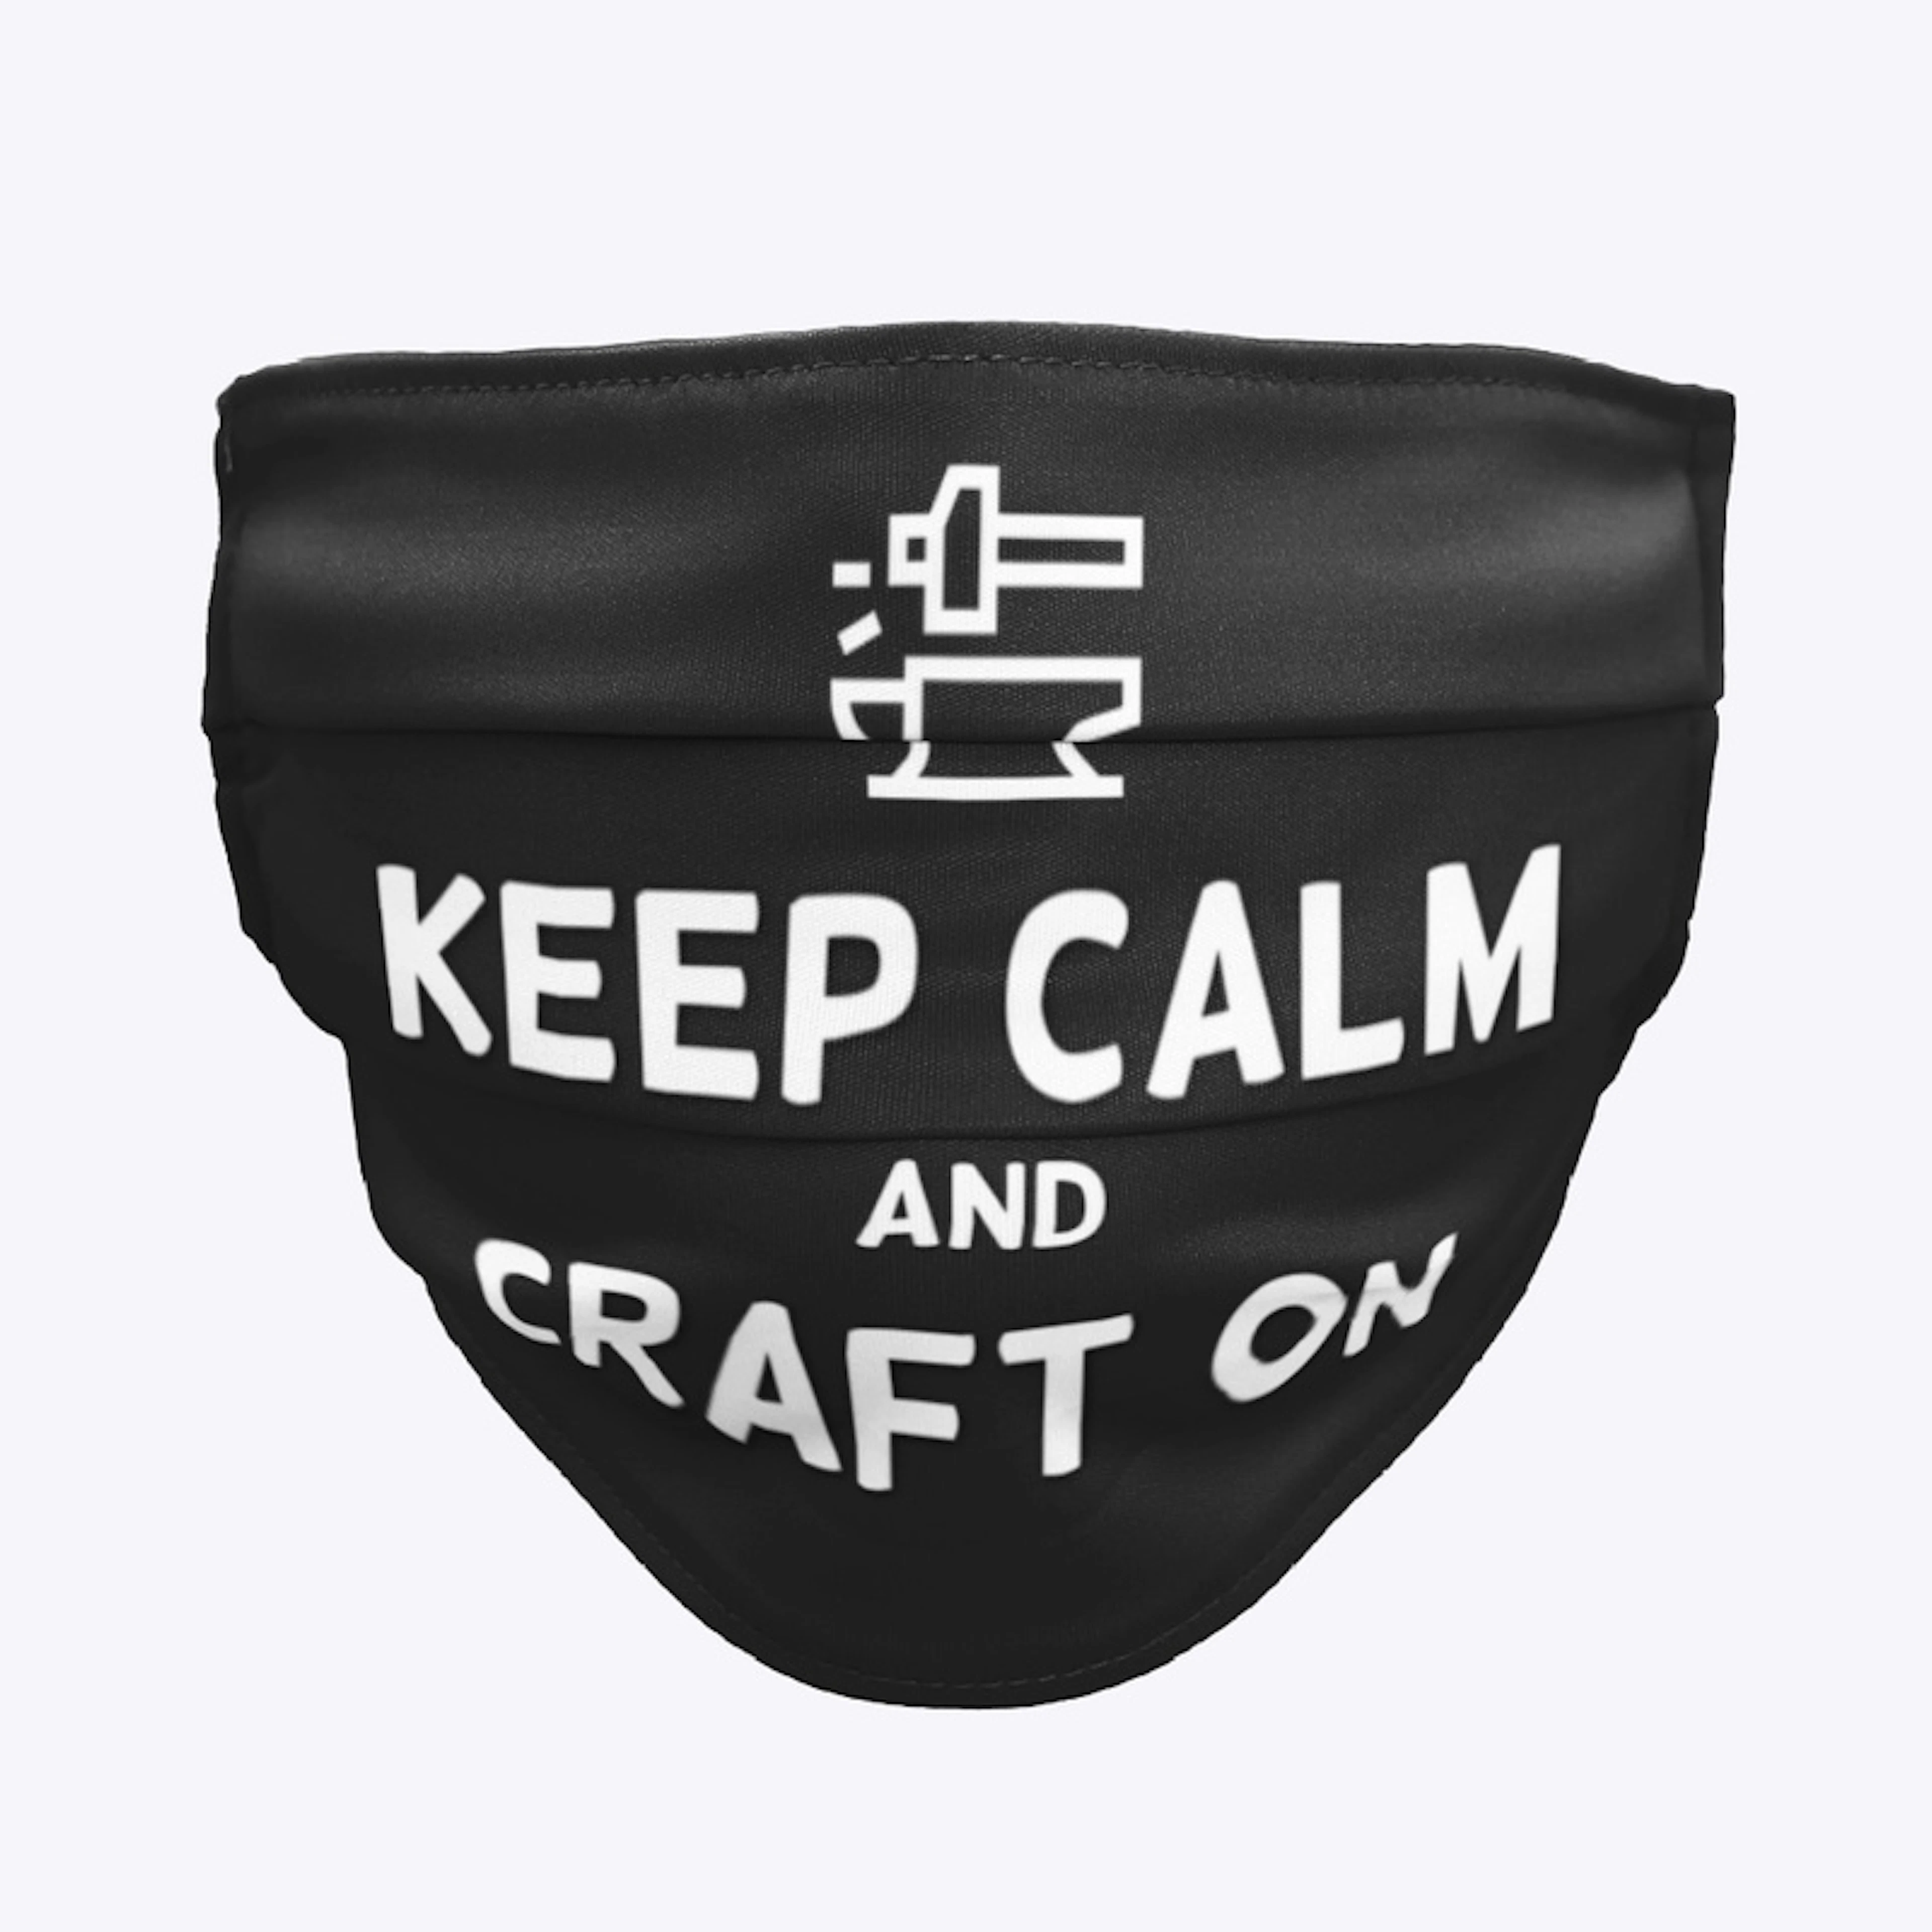 Keep Calm and Craft On Mask